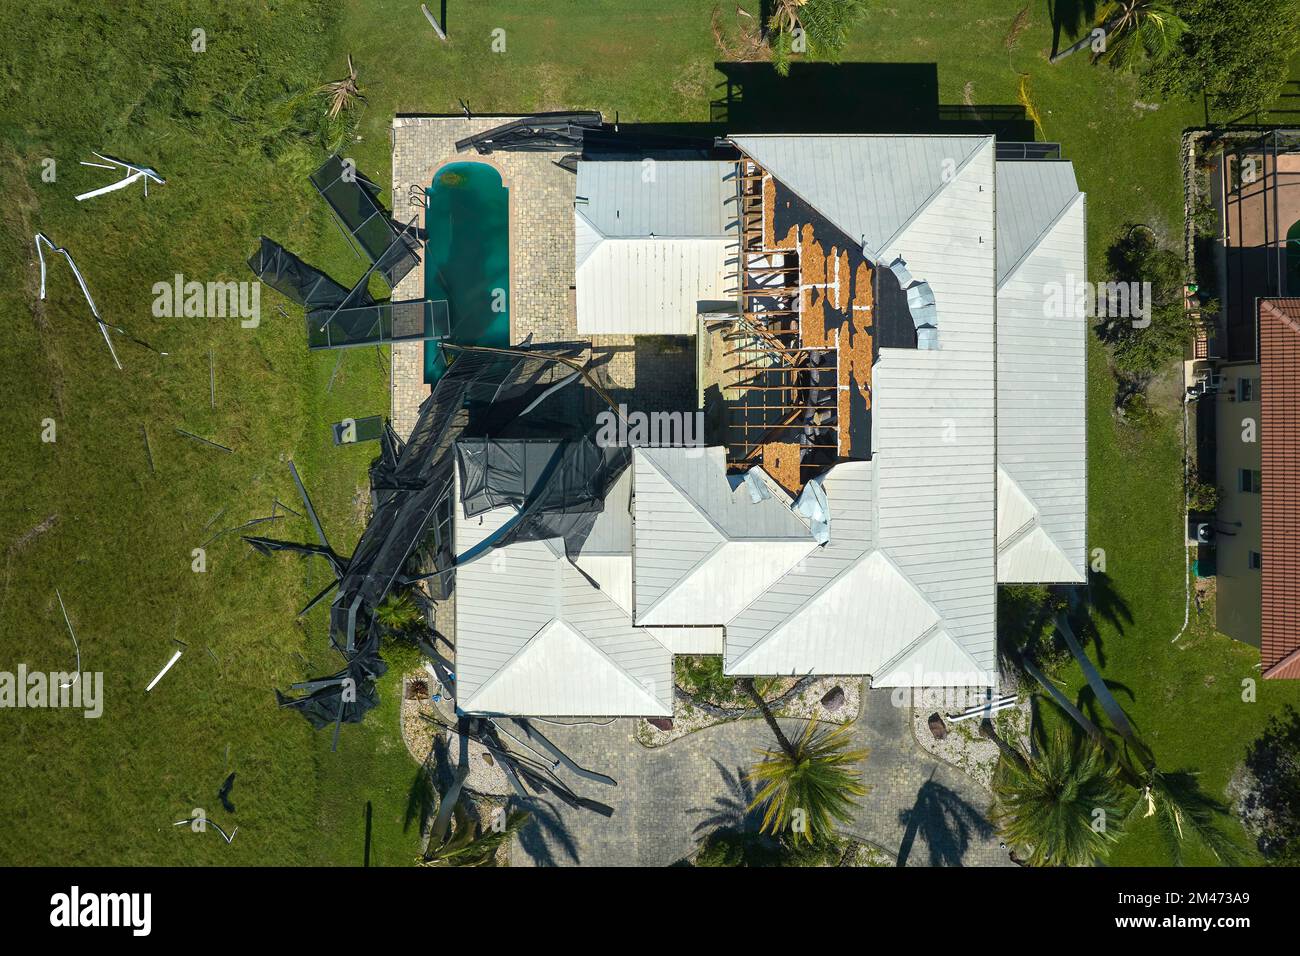 Hurricane Ian destroyed swimming pool lanai enclosure on house yard in Florida residential area. Natural disaster and its consequences Stock Photo